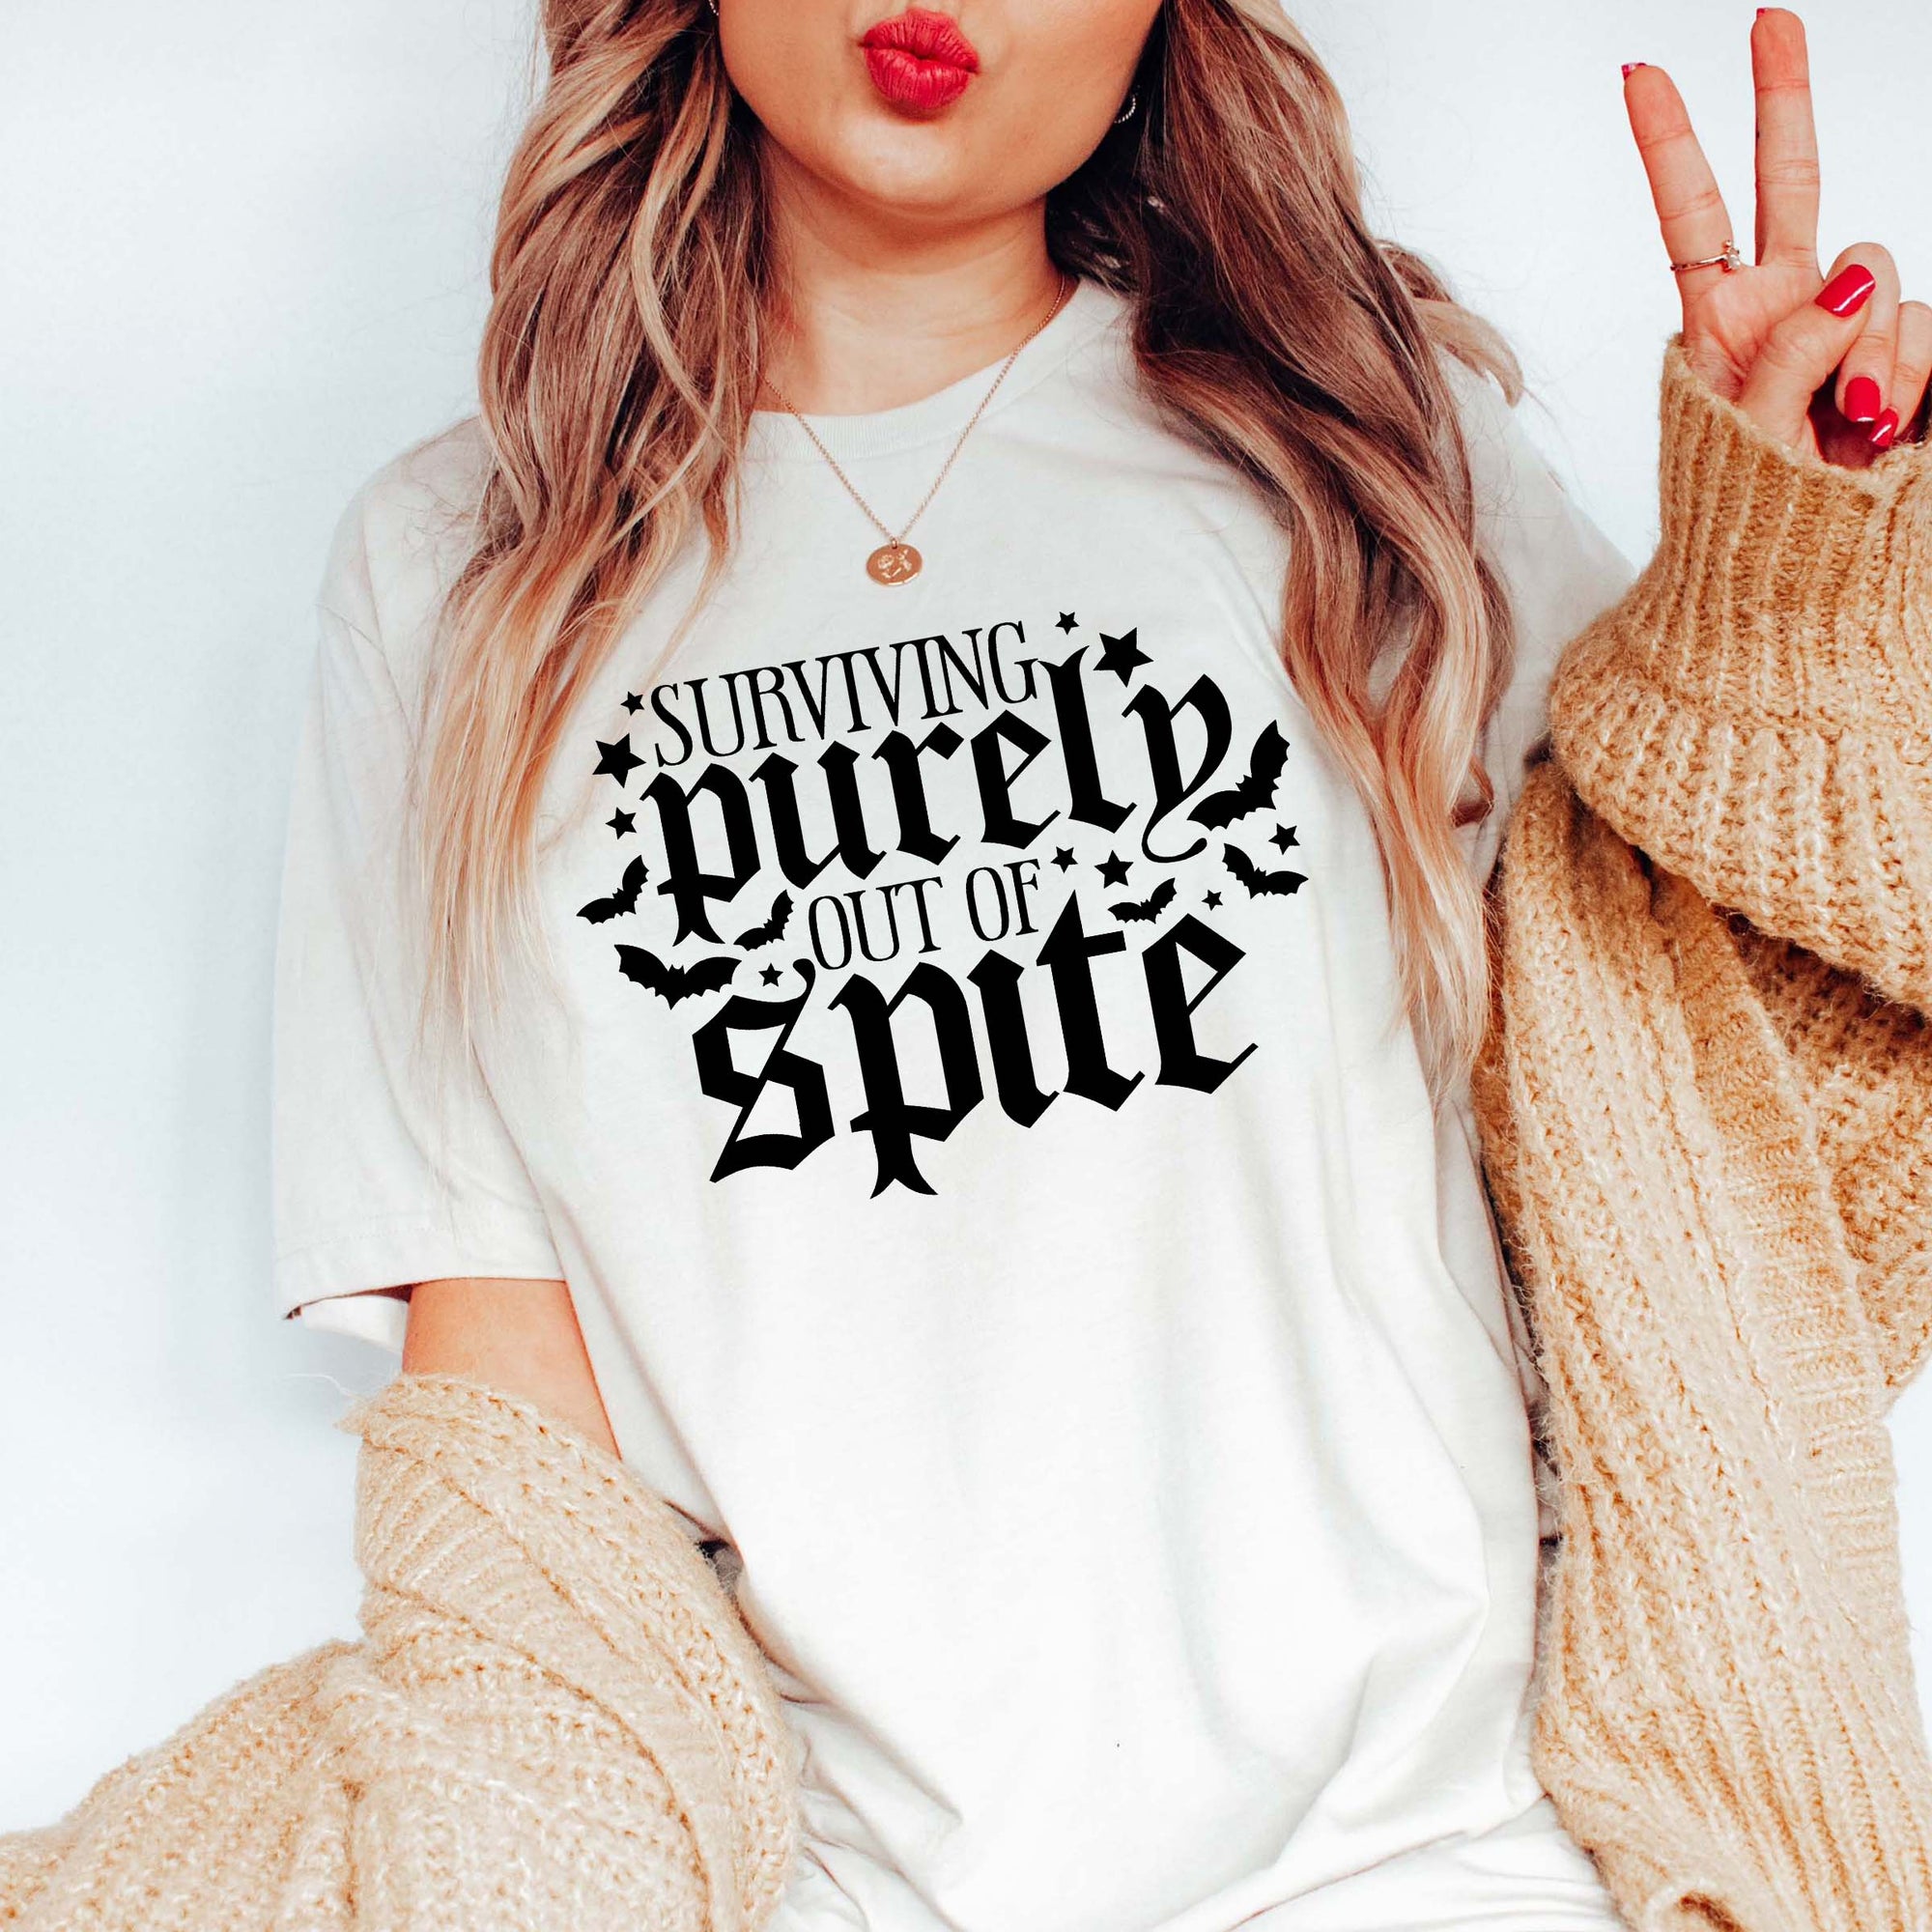 Surviving purely out of Spite Tee